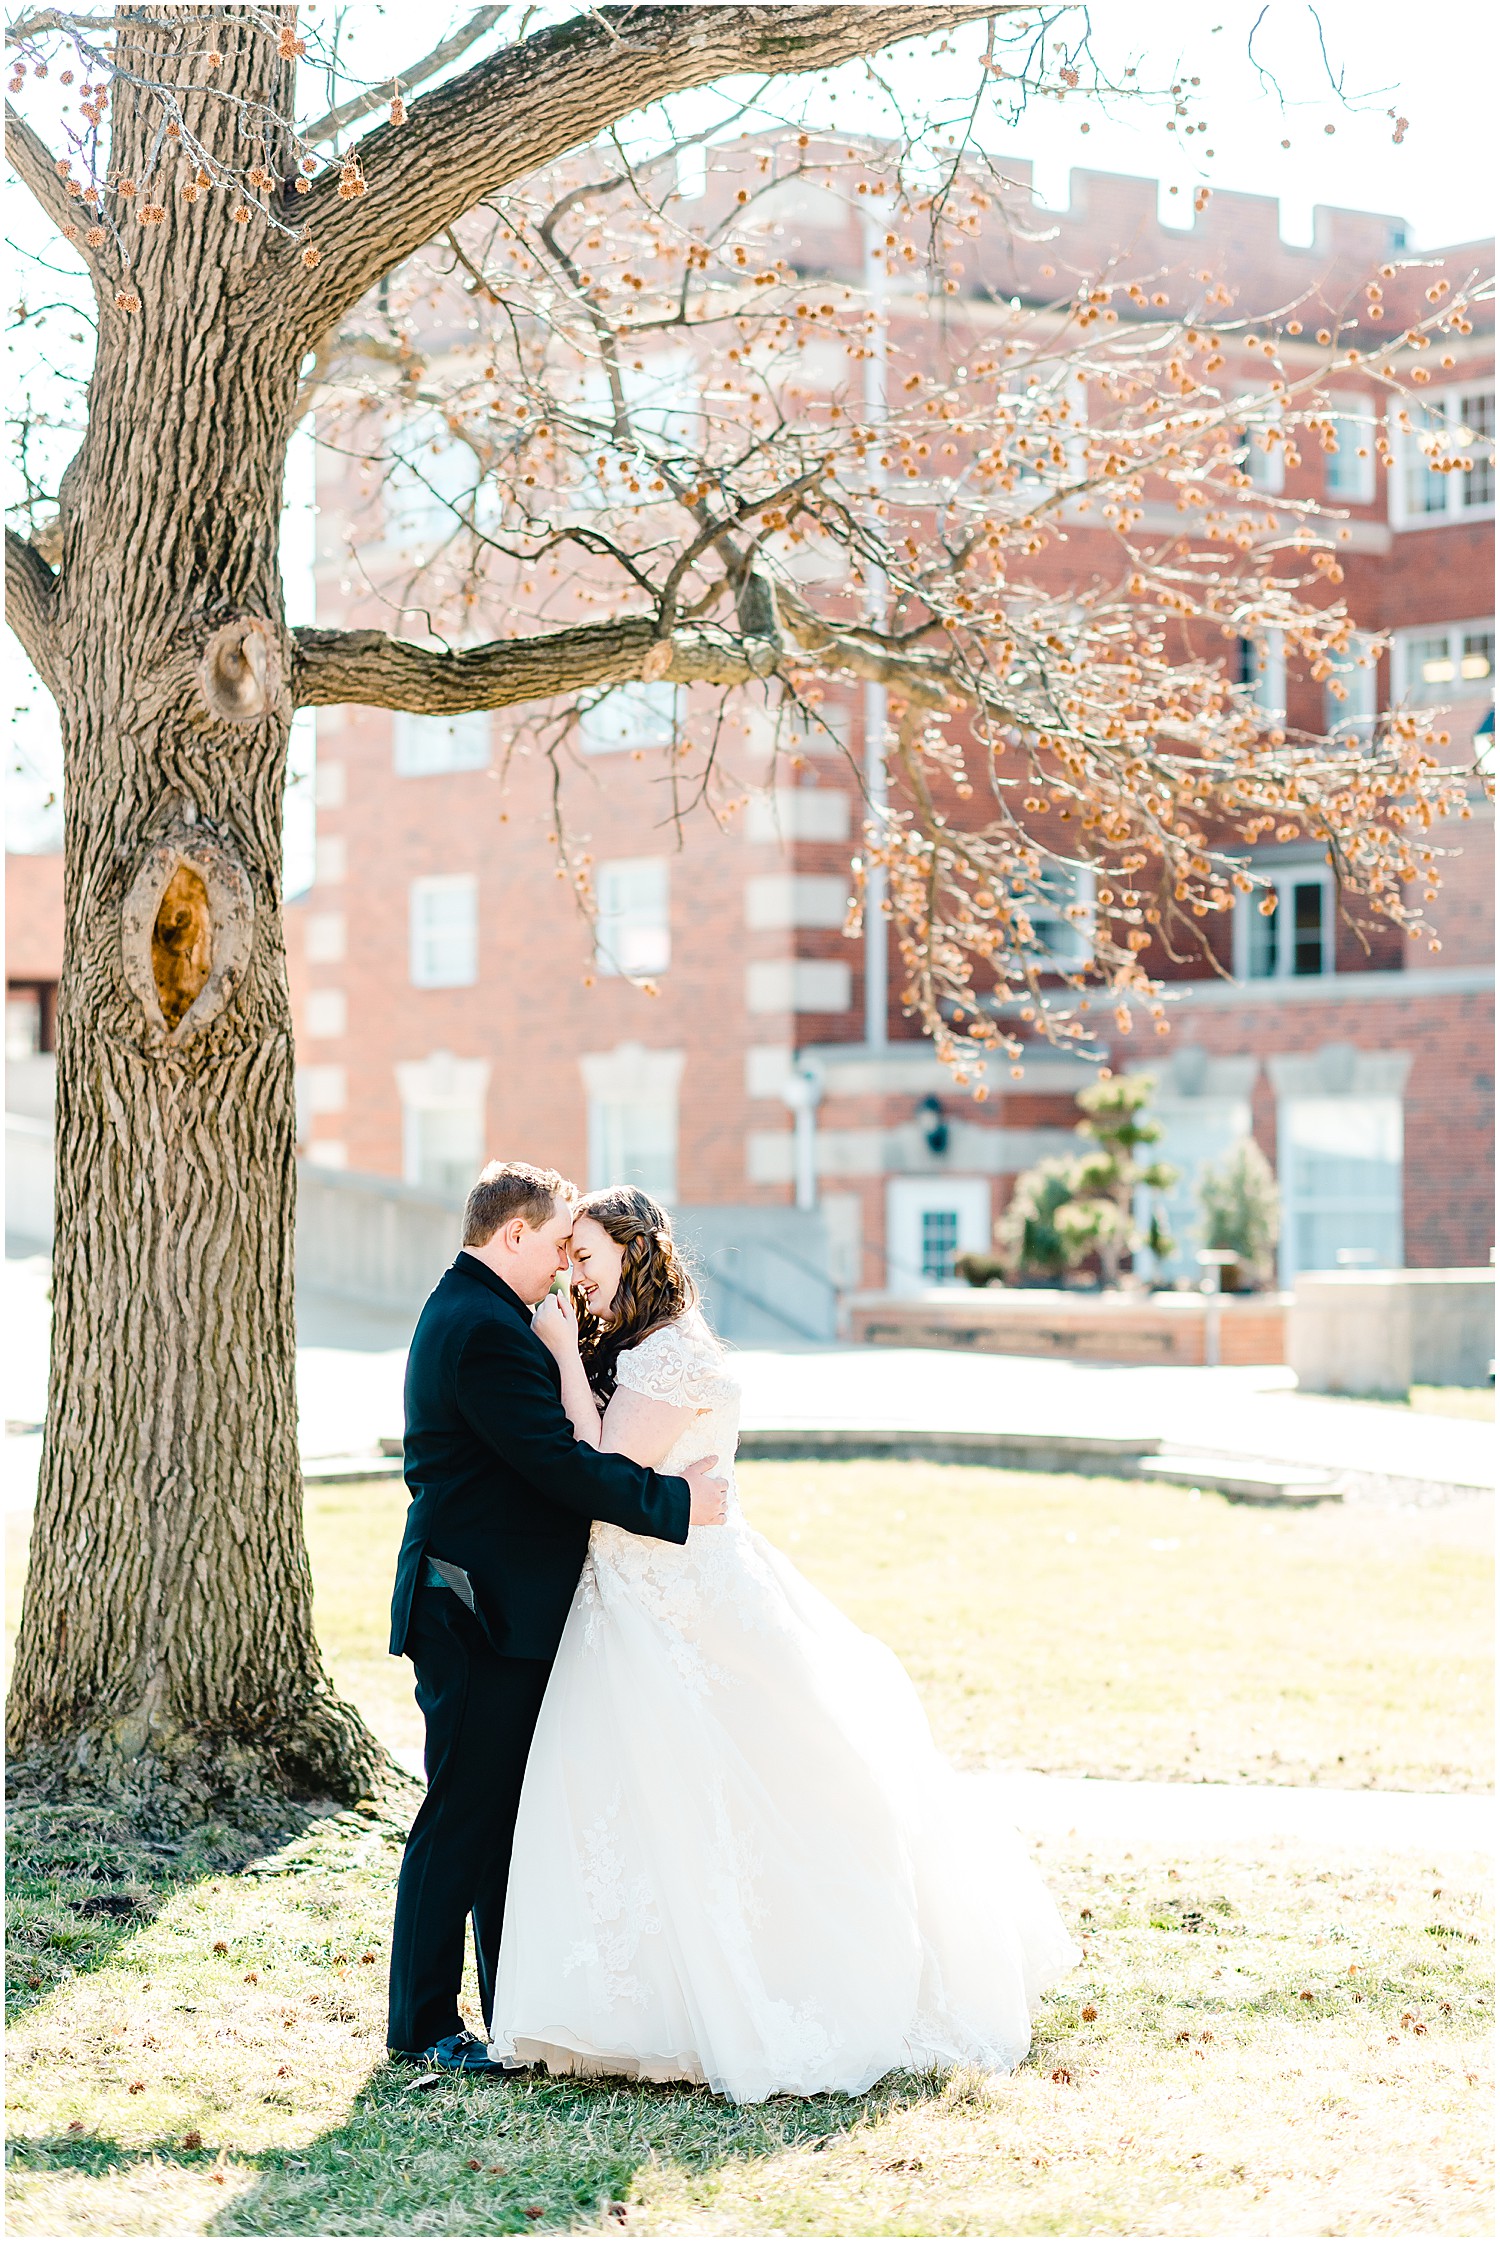 bride and groom hugging under large tree on Stephen's college campus